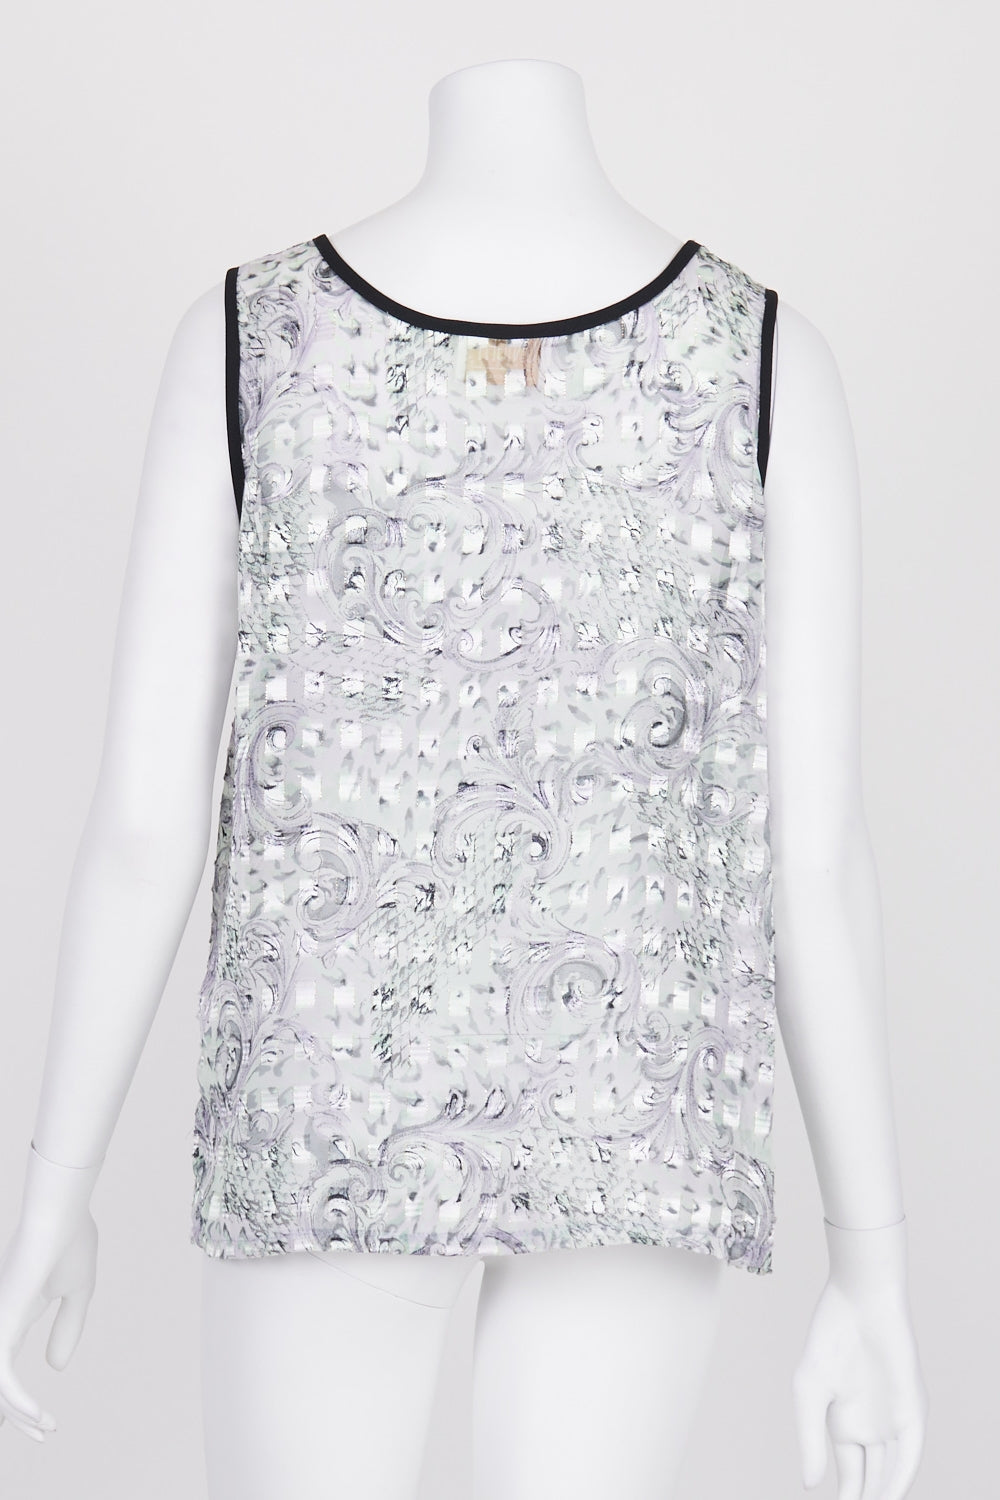 Tonight's Vintage Classics Patterned Sheer Sleeveless Top 12